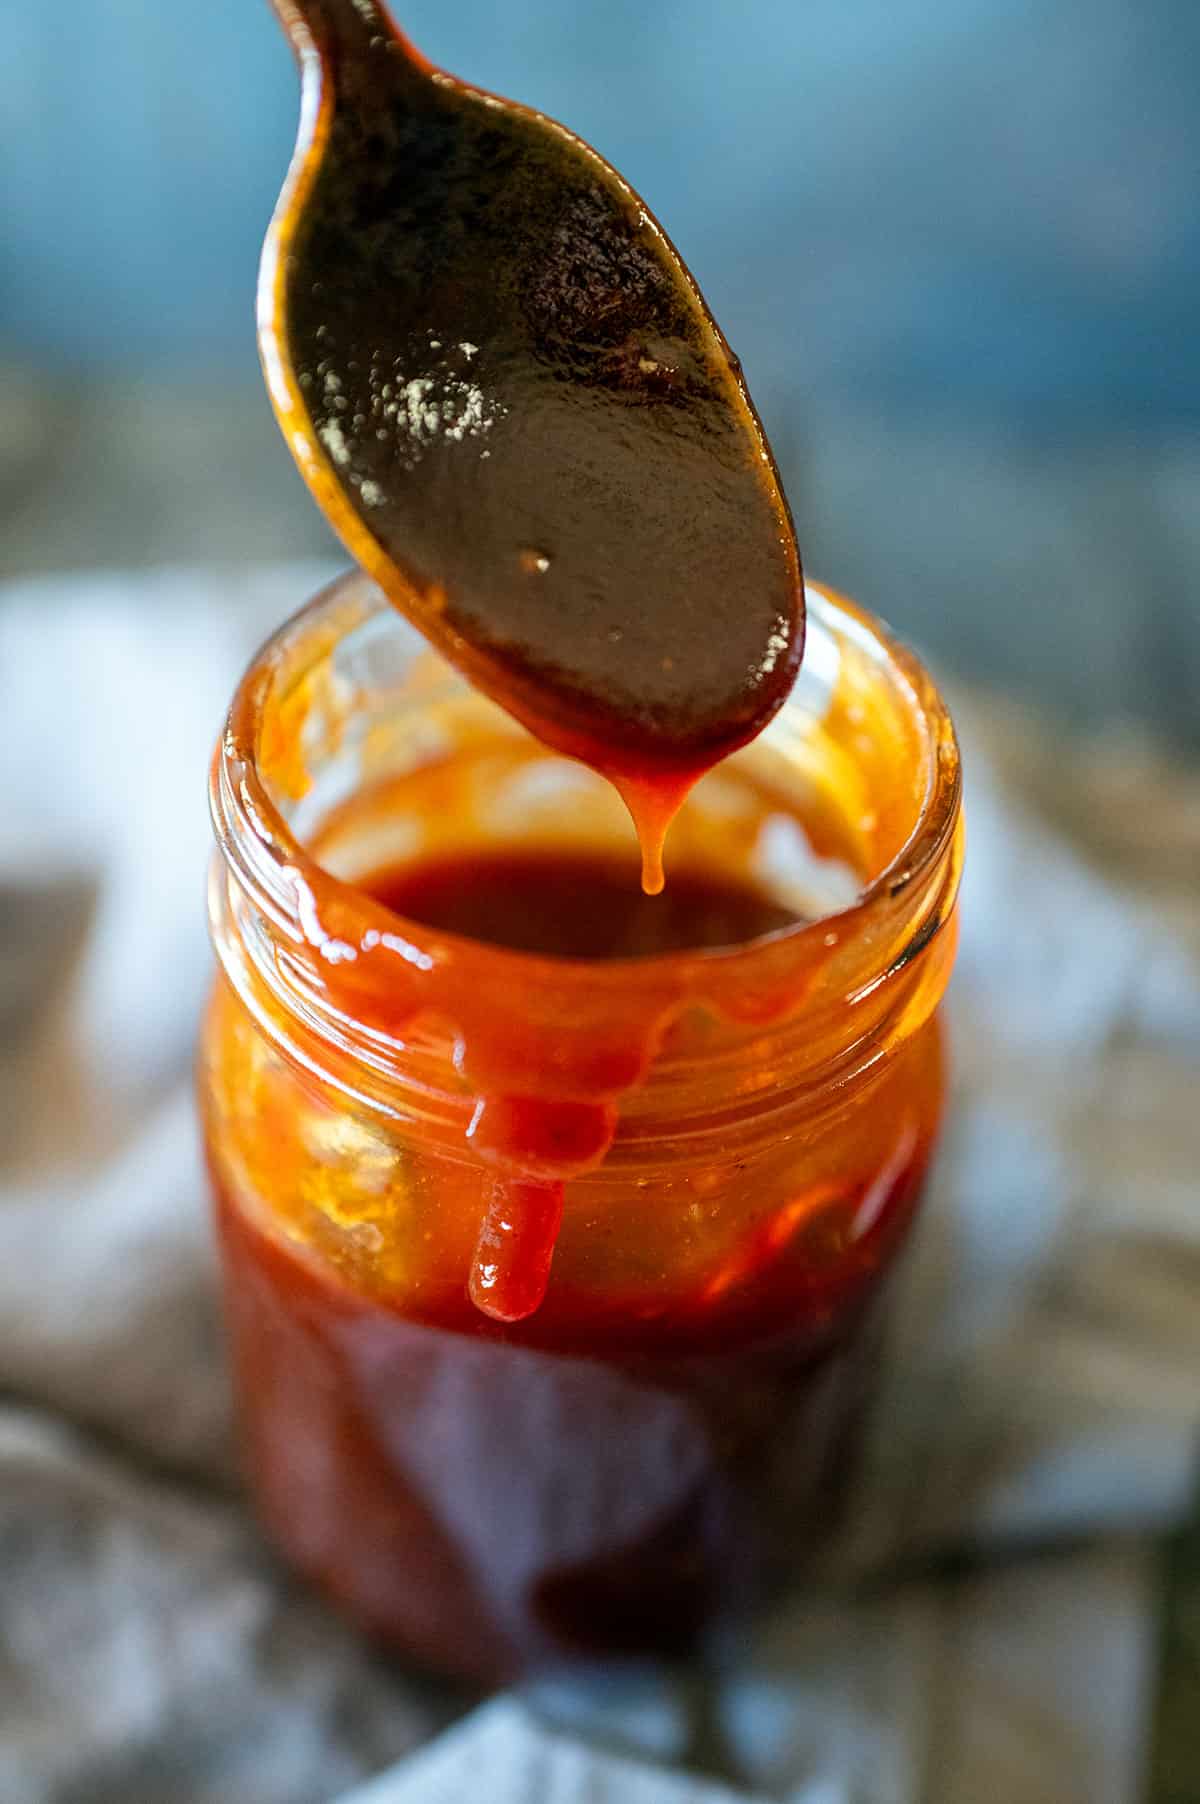 Spoon scooping BBQ sauce out of a jar.